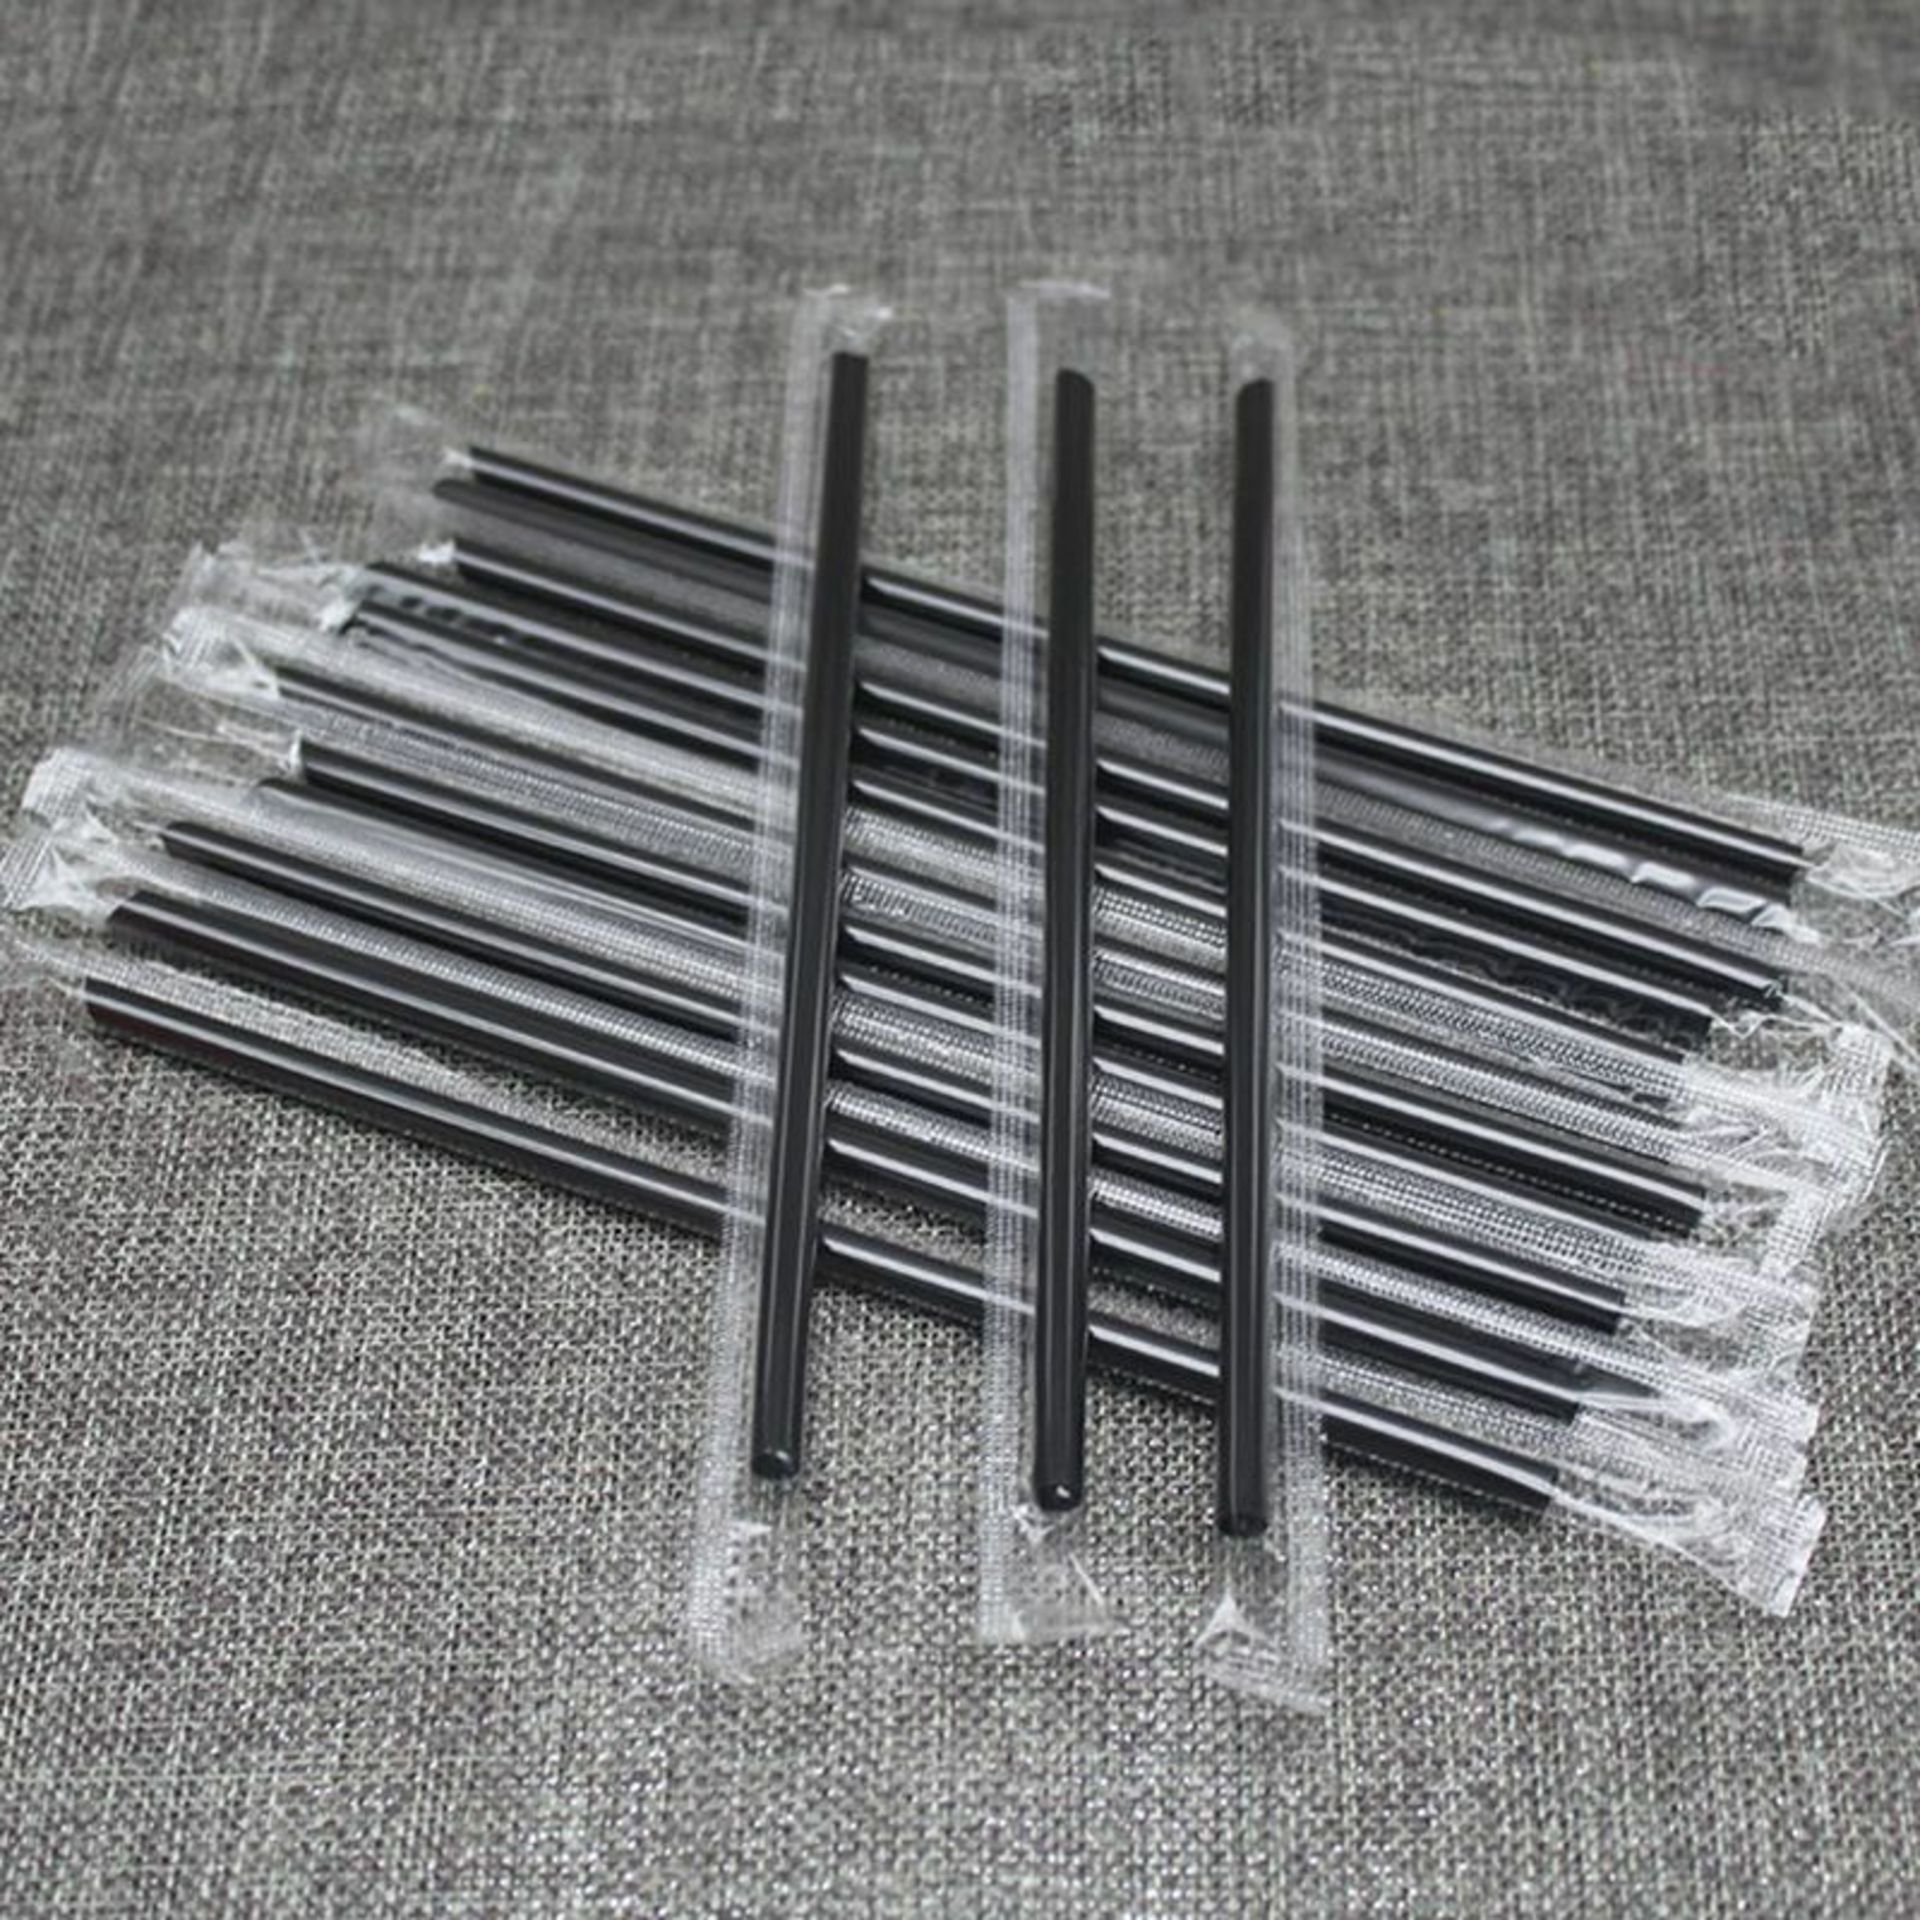 20,000 x NEW SEALED BLACK INDIVIDUALY WRAPPED DRINKING STRAWS IN 2 BOXES